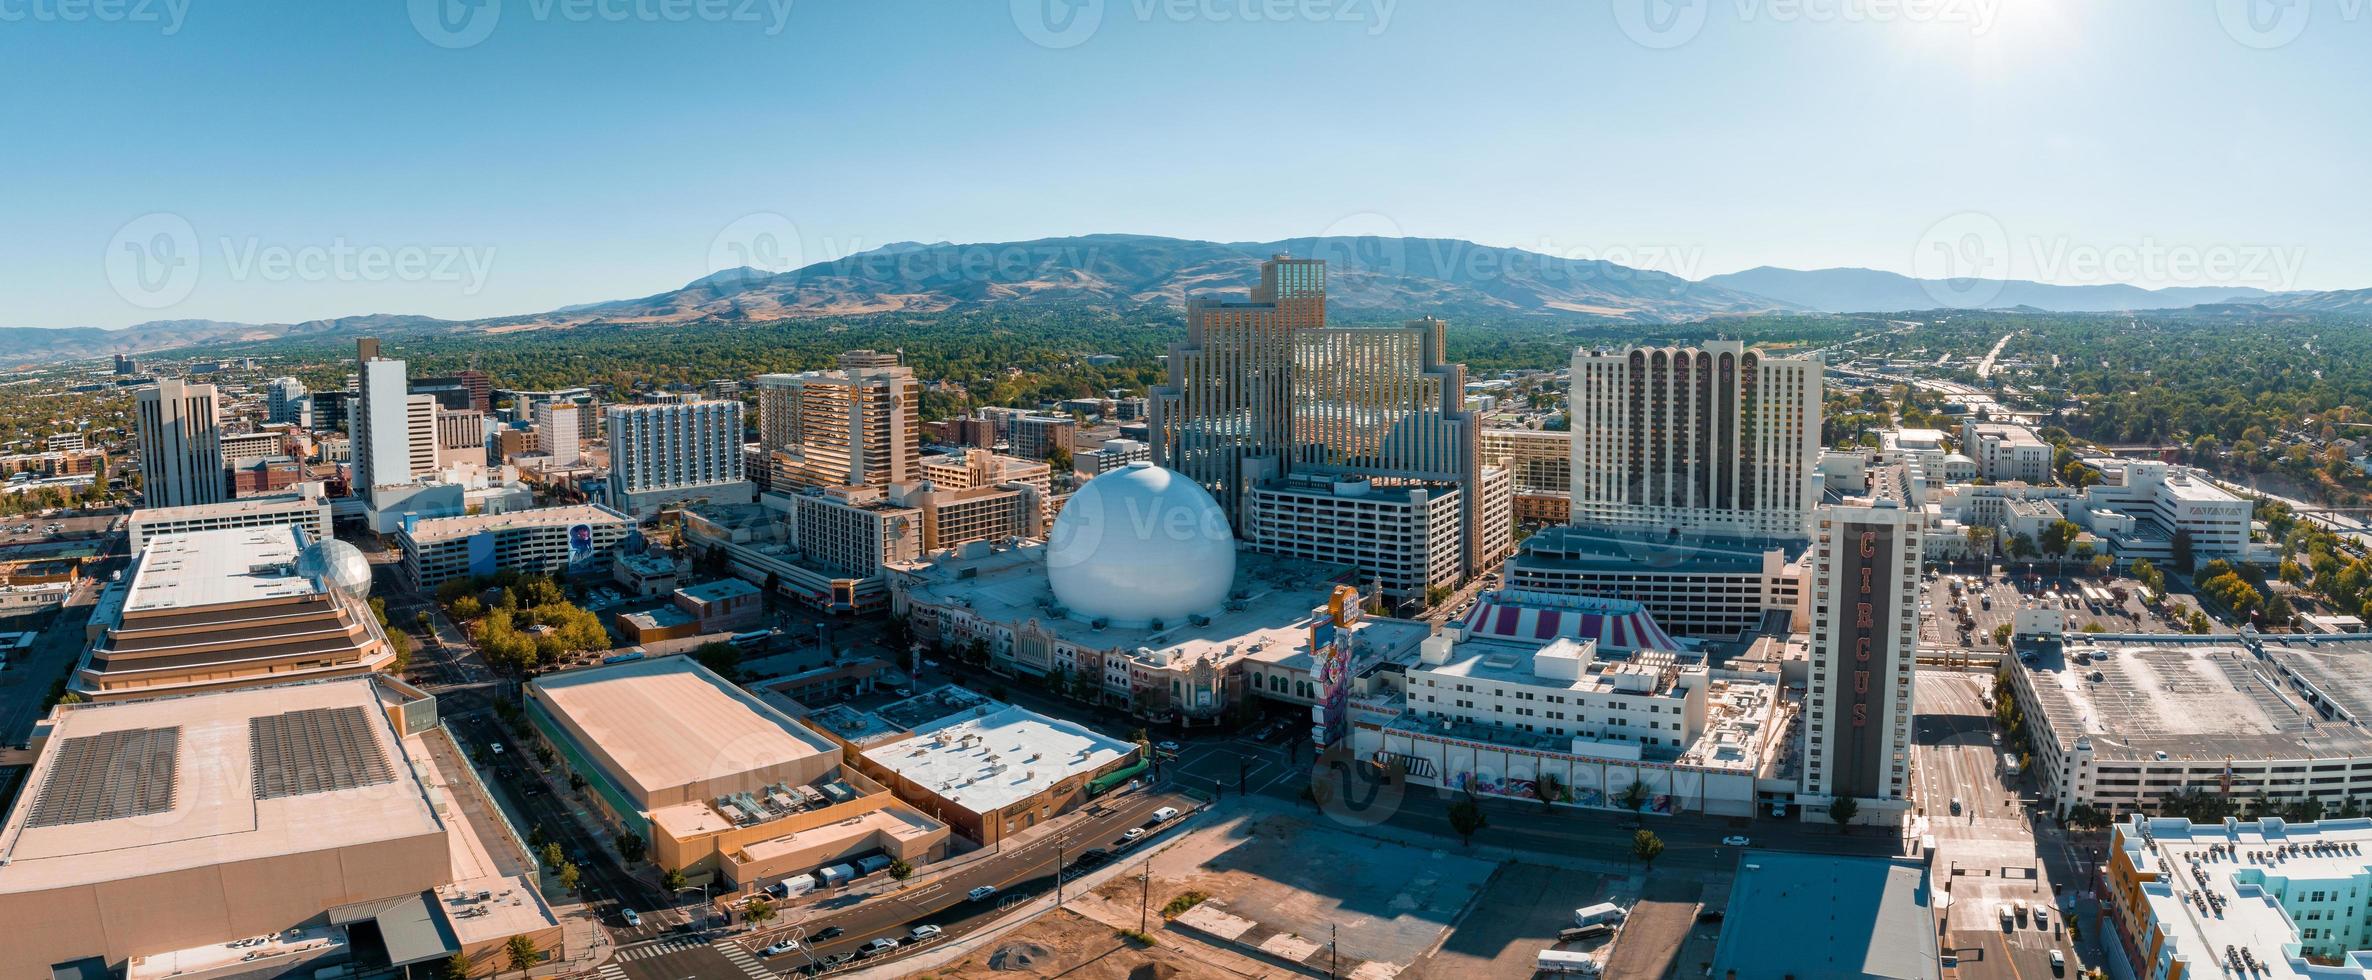 Panoramic aerial view of the city of Reno cityscape in Nevada. photo